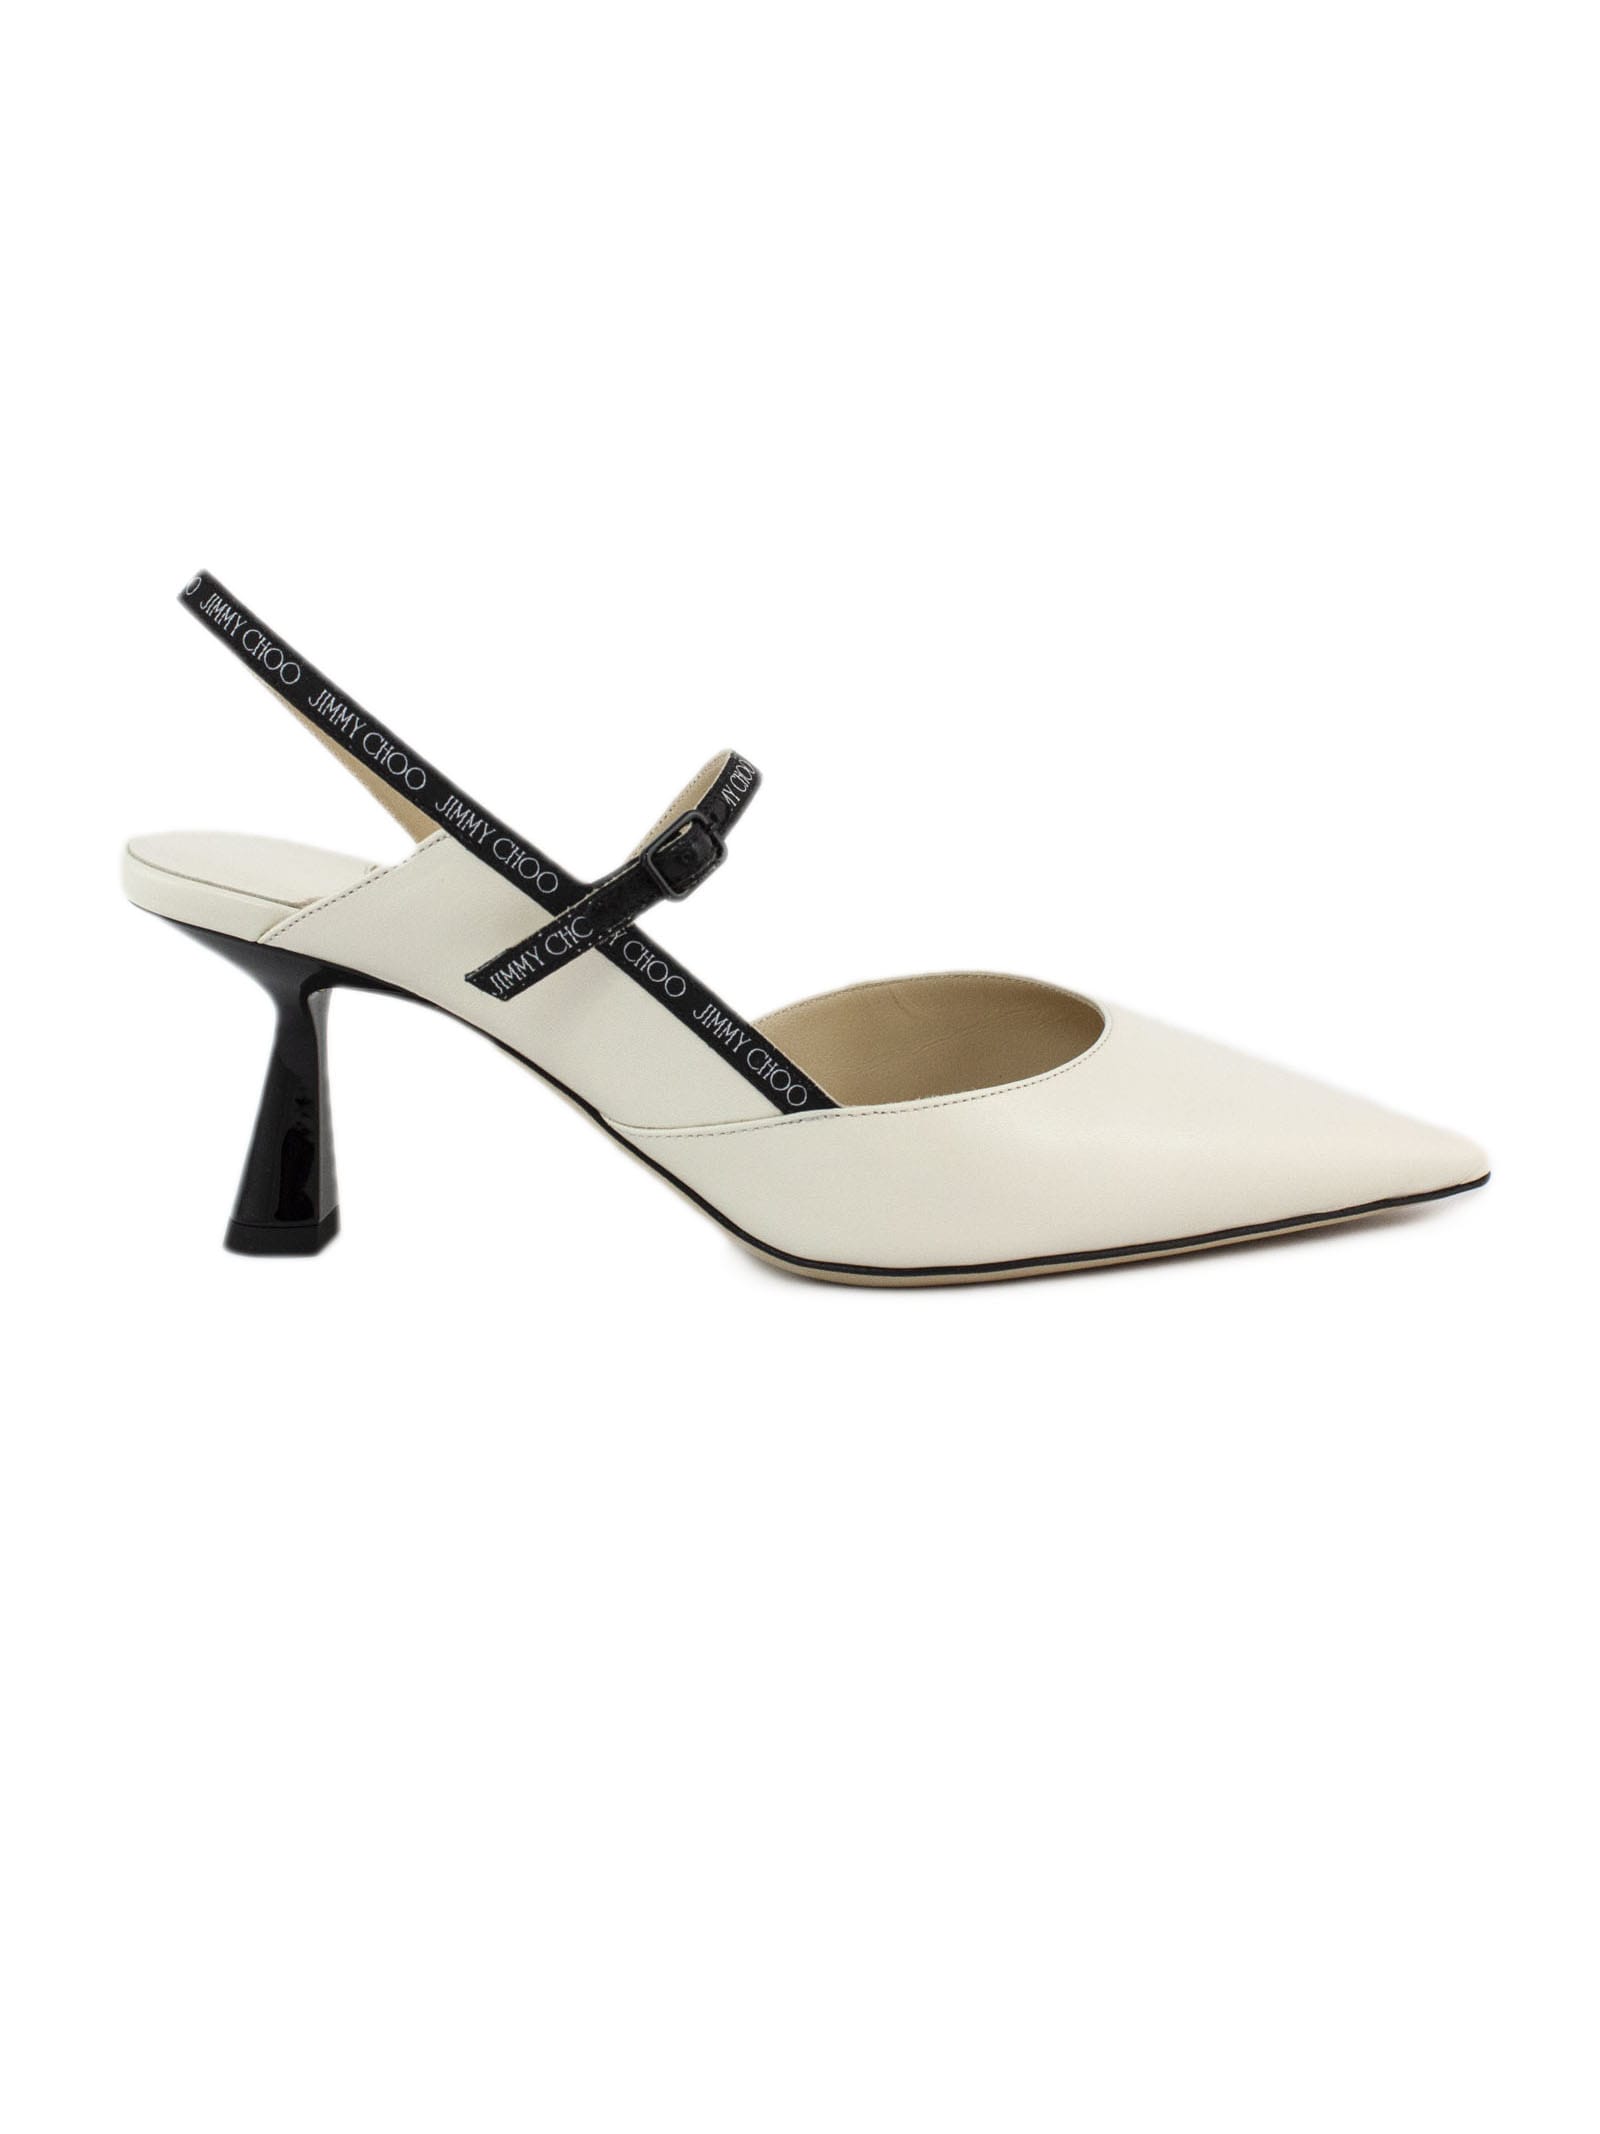 Buy Jimmy Choo Cream Ray Slingback Pumps online, shop Jimmy Choo shoes with free shipping